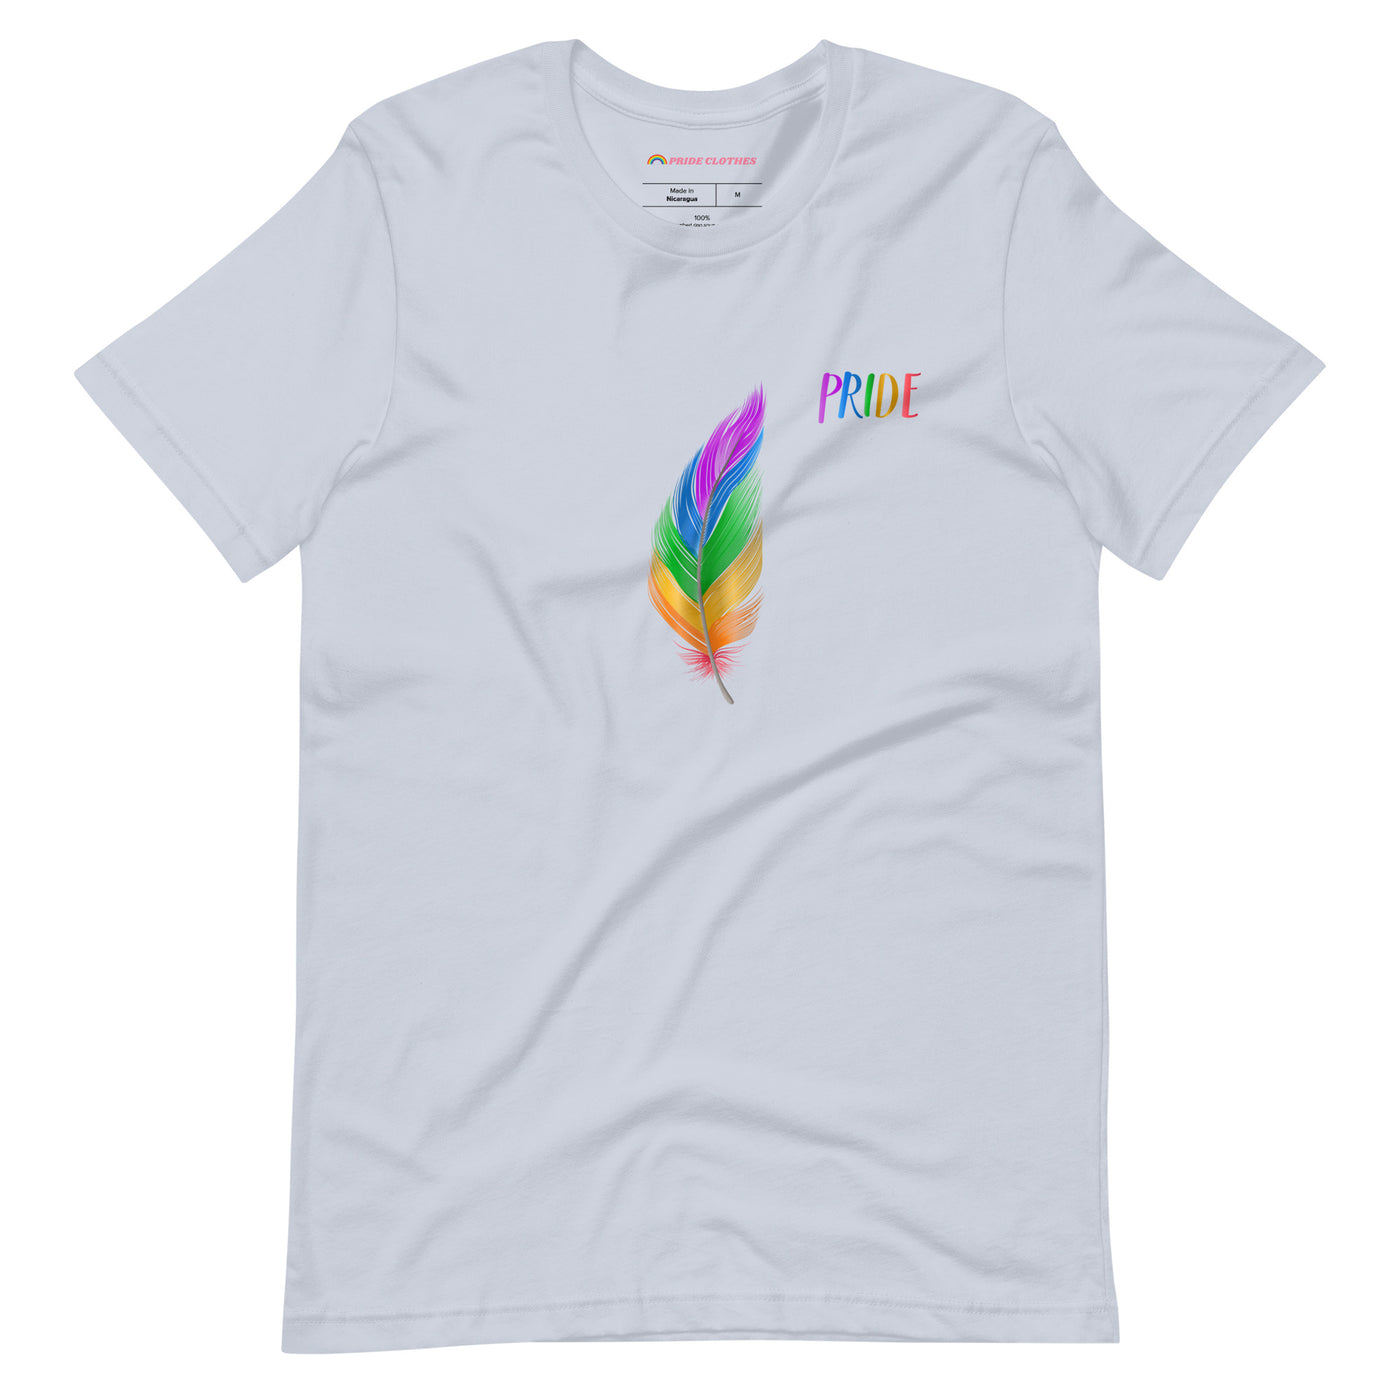 Pride Clothes - A Pride Feather Shirt That Can Make You Look and Feel Your Best - Light Blue